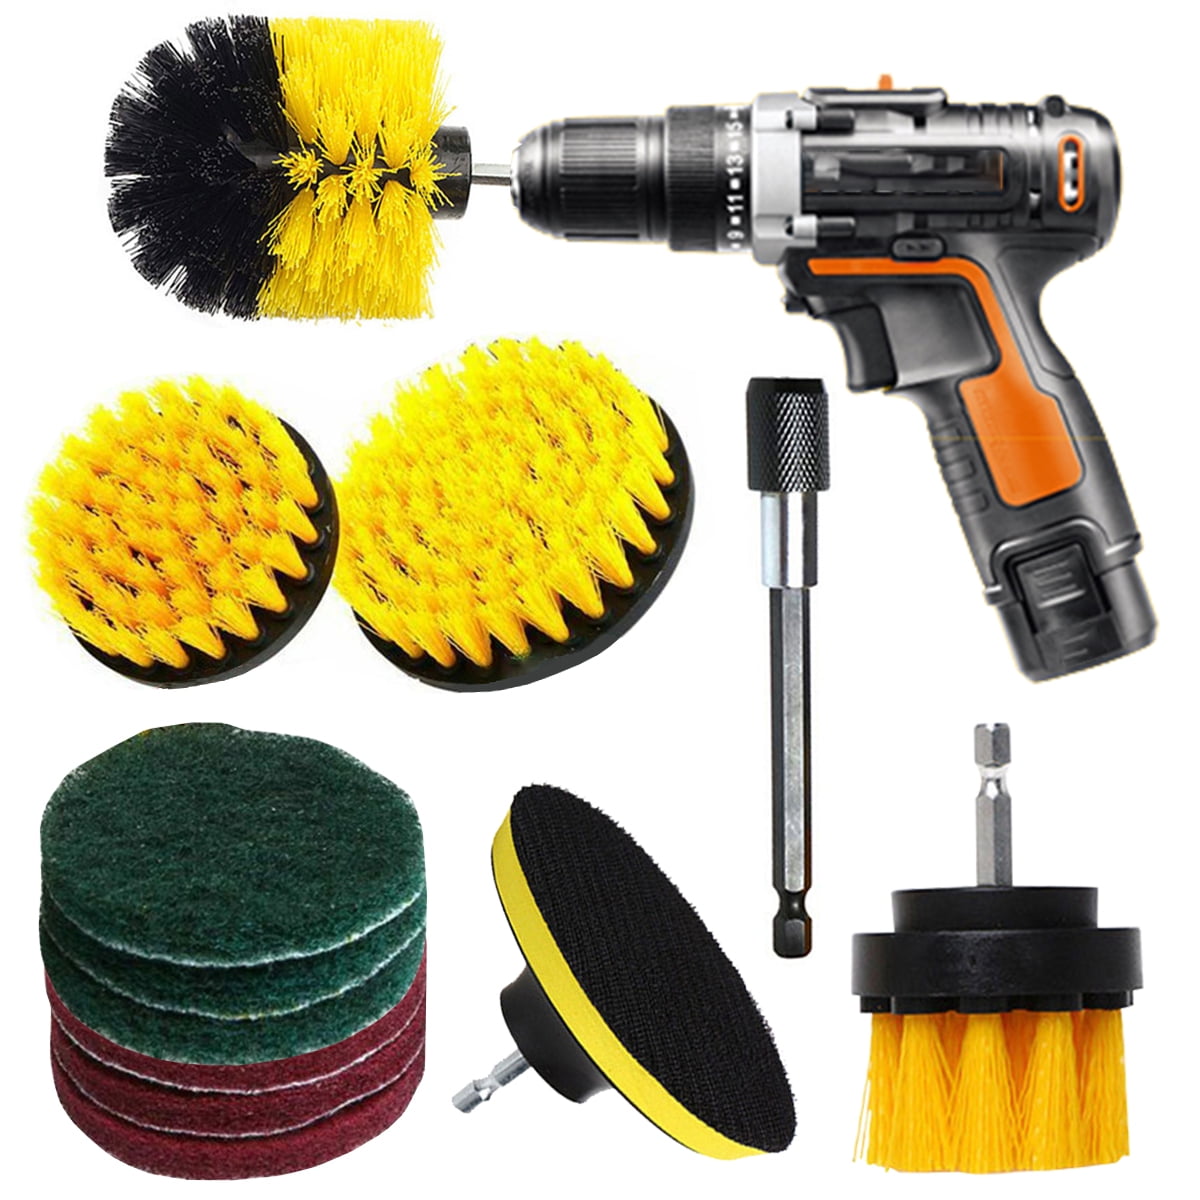 Motorcycle Cleaning Supplies Boat VIBRATITE 18 Pieces Drill Brush Attachments with Long Reach Attachment Auto Power Scrubber Soft White Car Wash Kit with Sponge & Buffing Pad for Carpet Interior Detail Brush